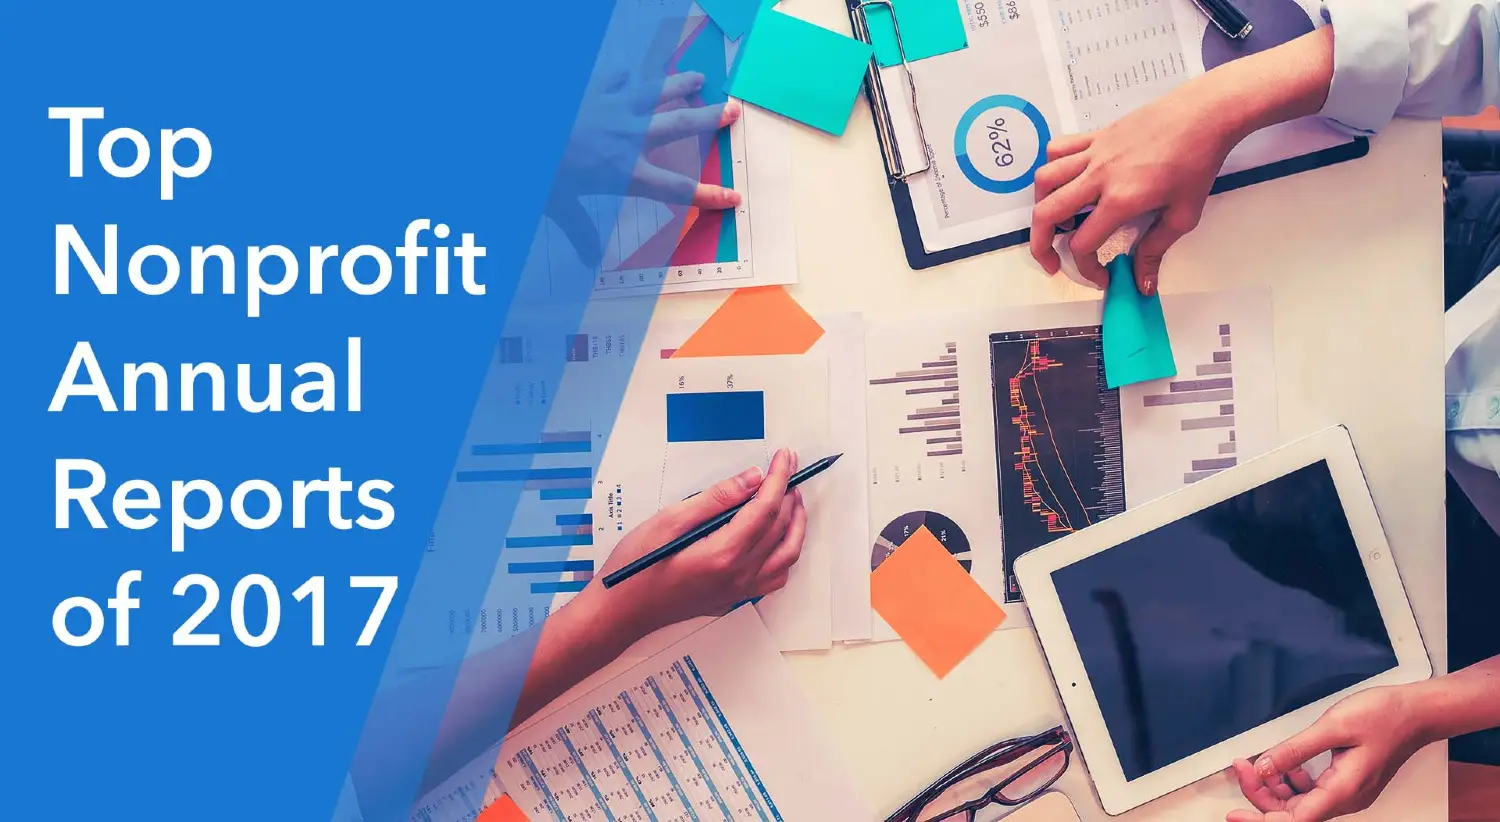 7 of the Best Nonprofit Annual Reports From 2017